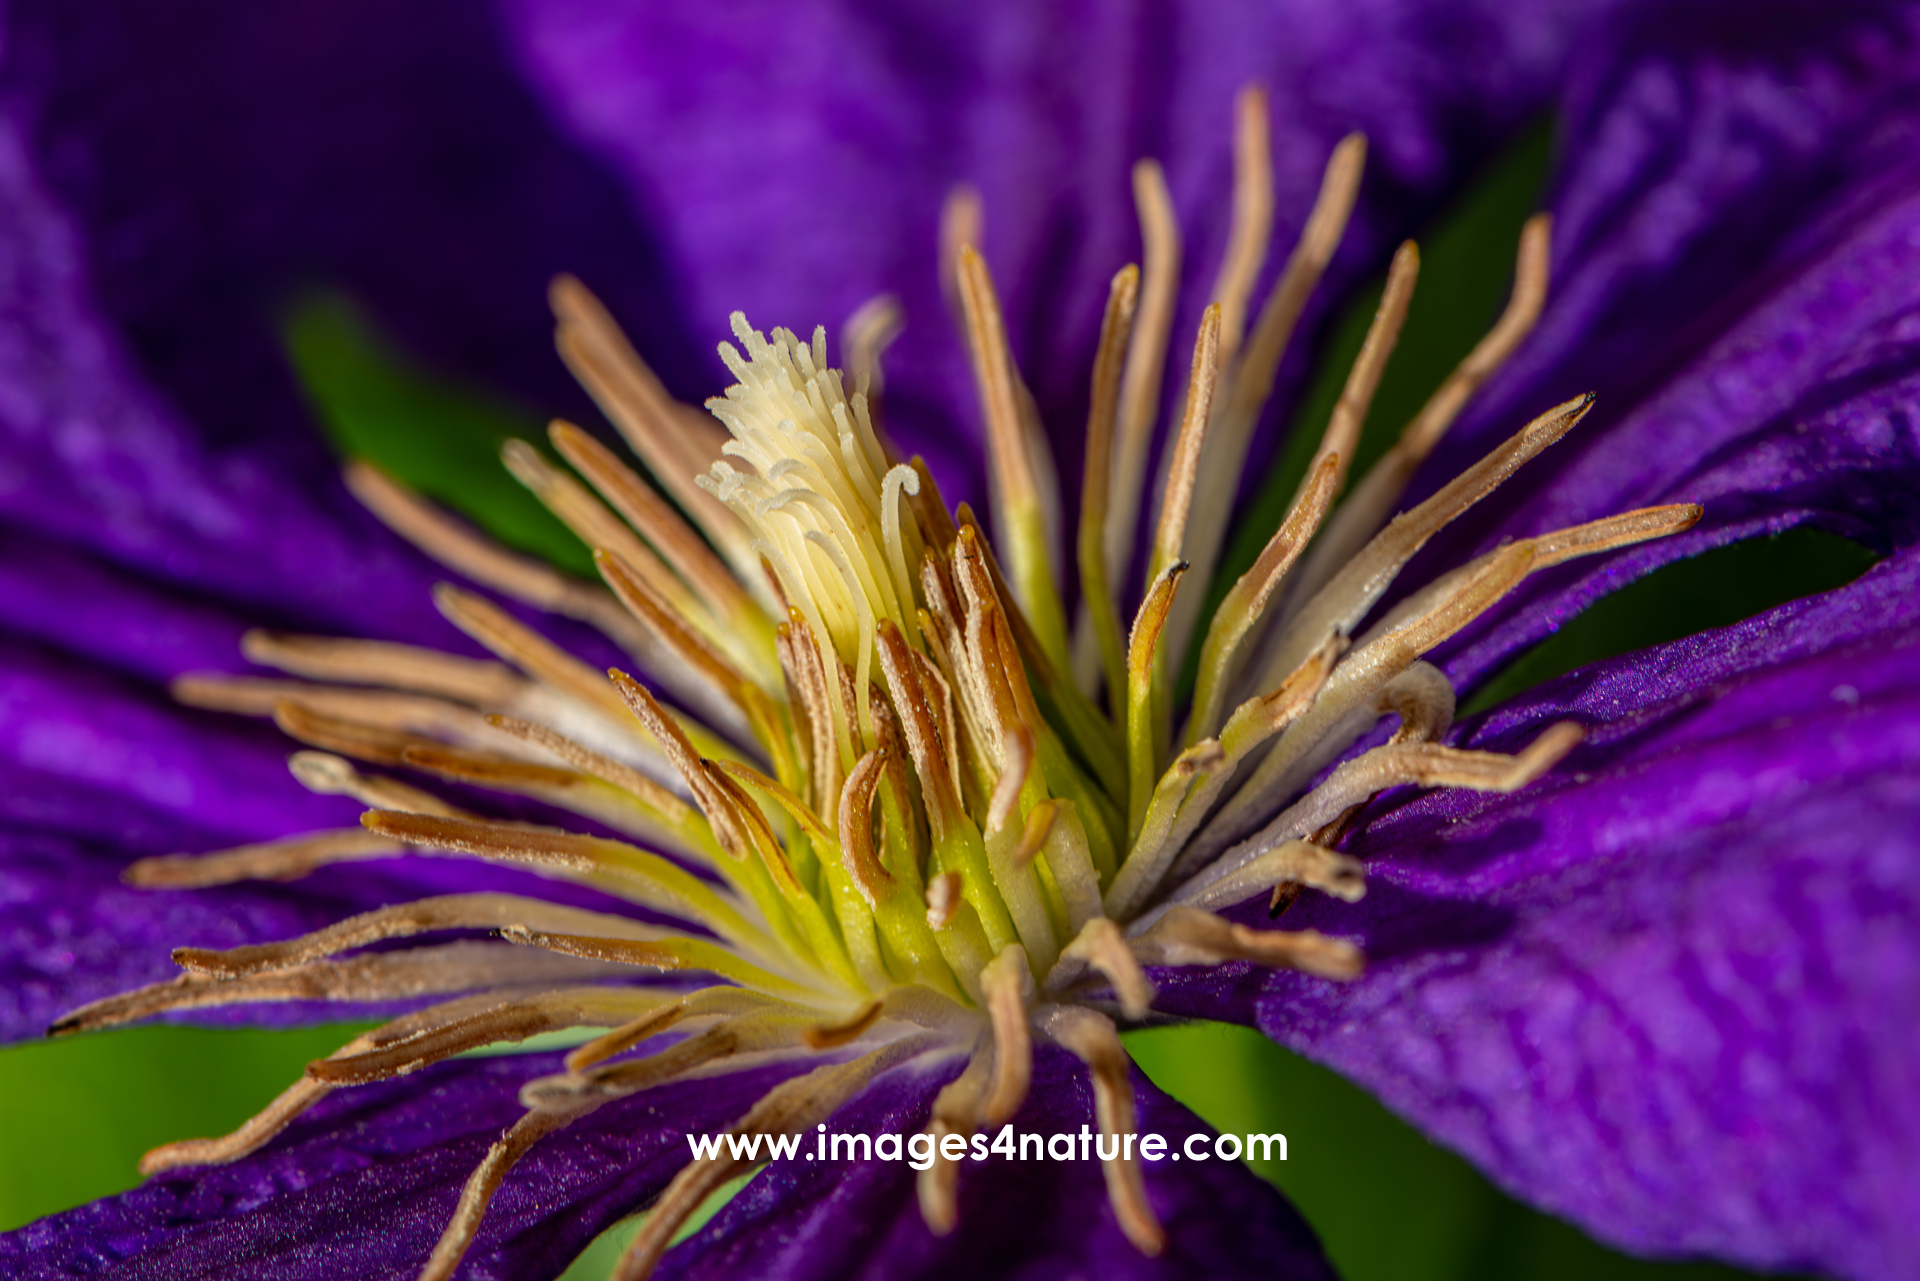 Macro shot of the crown-shaped center of a dark purple clematis flower, showing all the details of the finger stamens